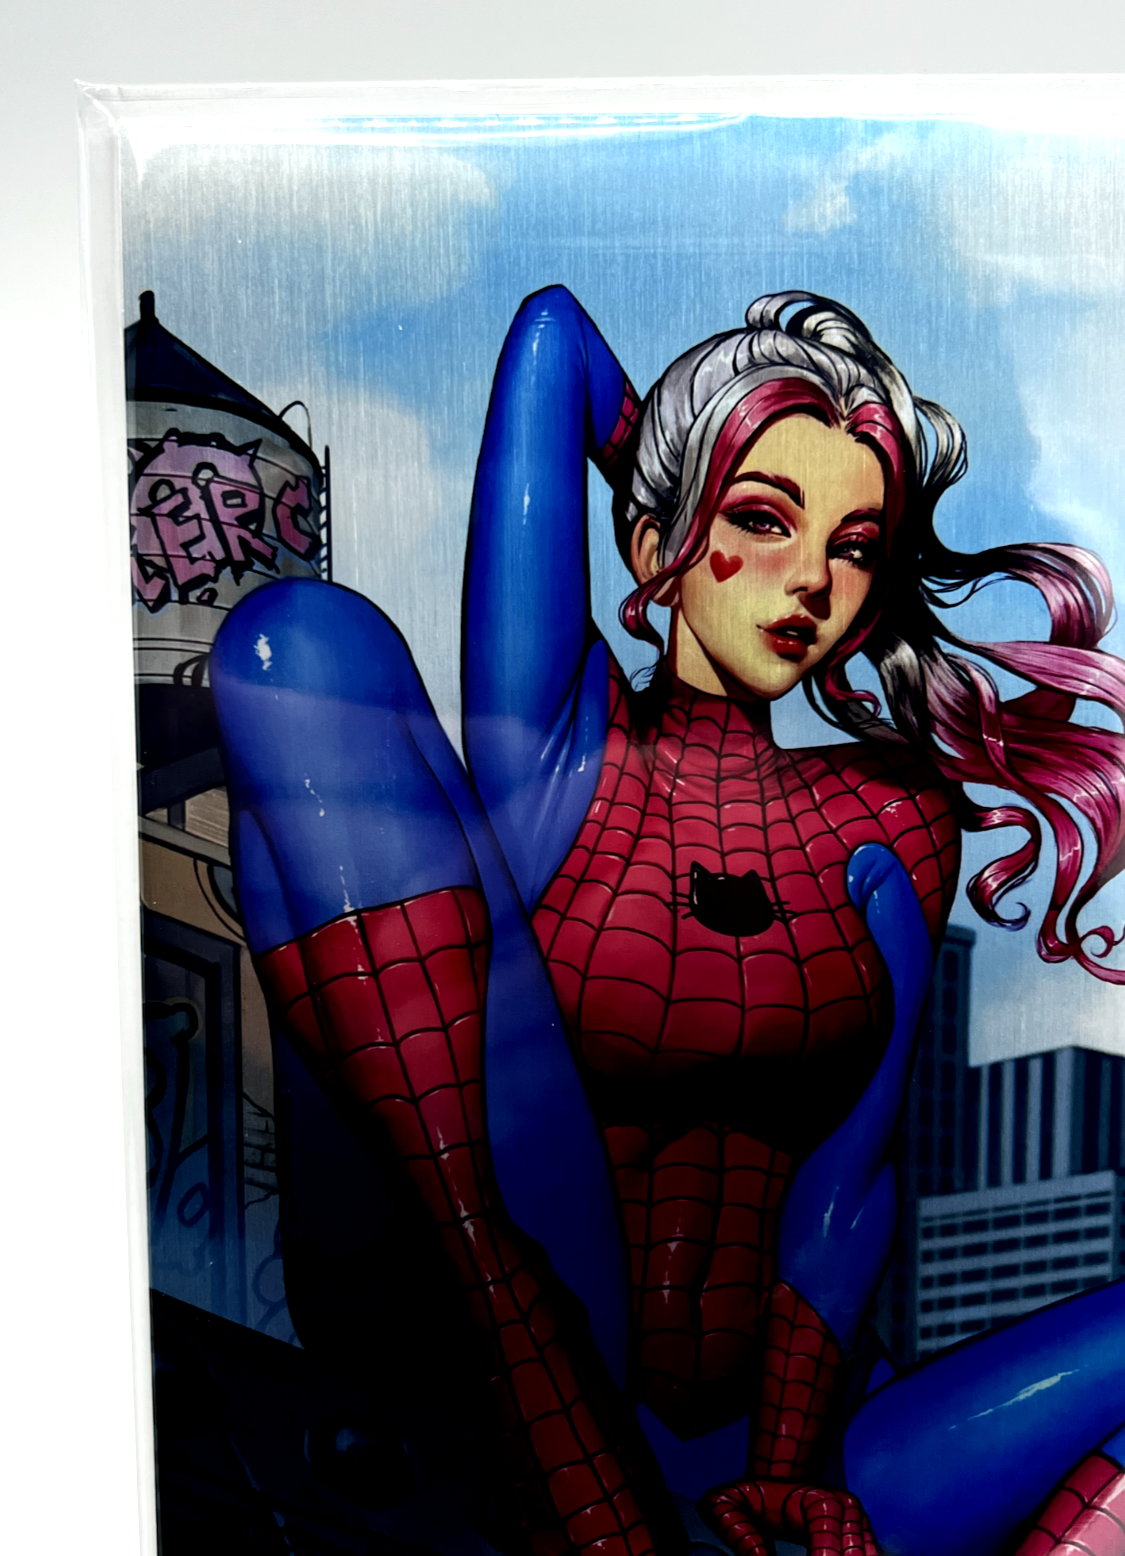 Miss Meow #4 Miss Spidey Dravacus Virgin Metal Cover Limited Edition #5/10